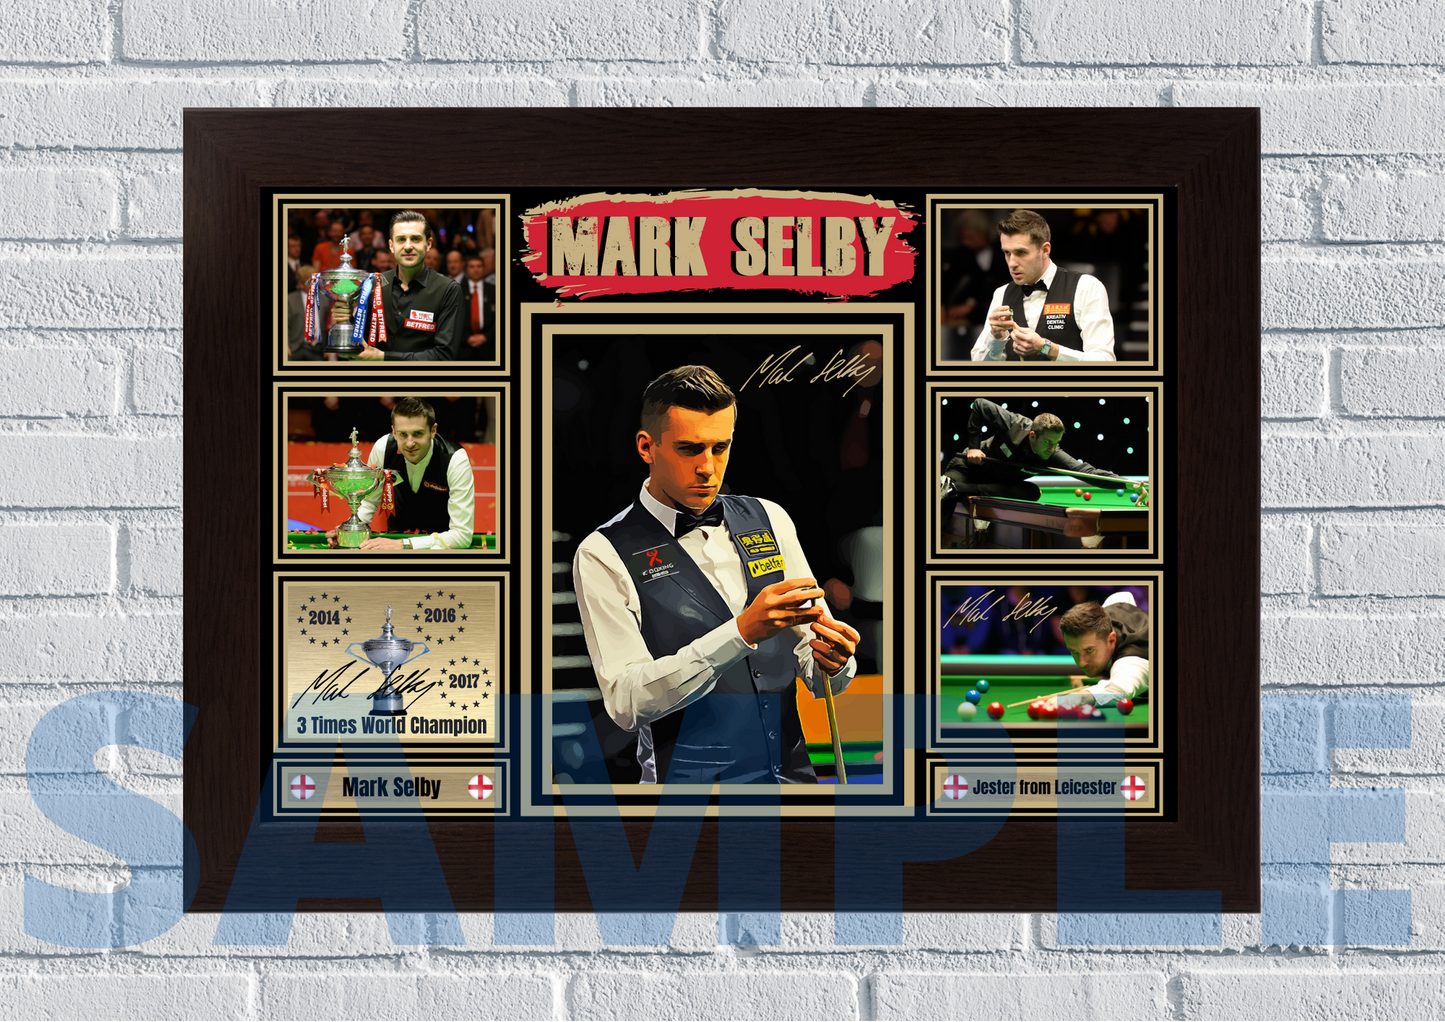 Mark Selby Jester from Leicester (Snooker) #77 - collectible/memorabilia/print/ signed